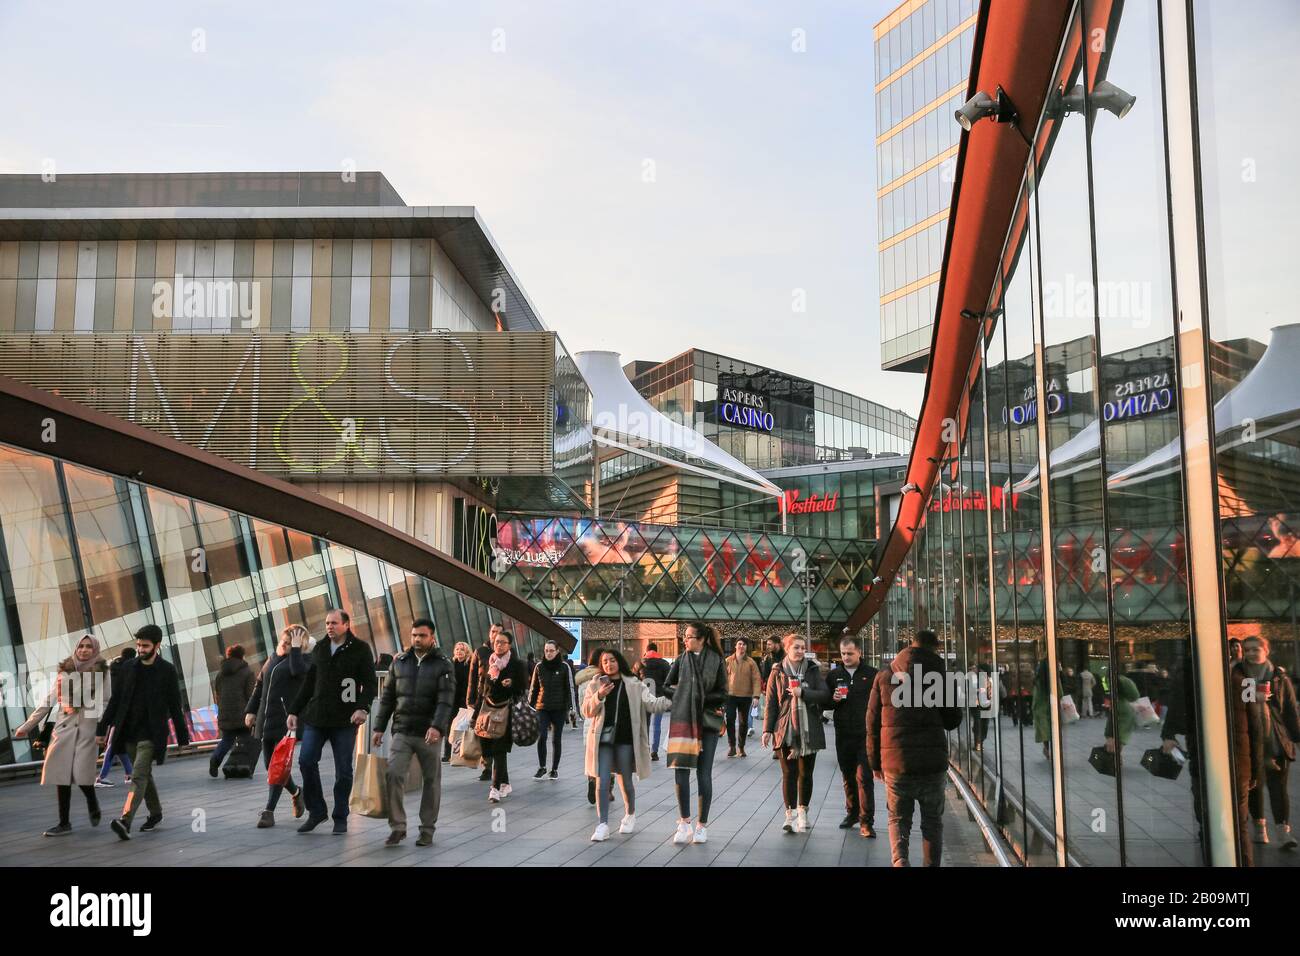 People and shoppers walking towards Westfield Shopping Centre, exterior with brand logos and signs, Stratford, London, UK Stock Photo